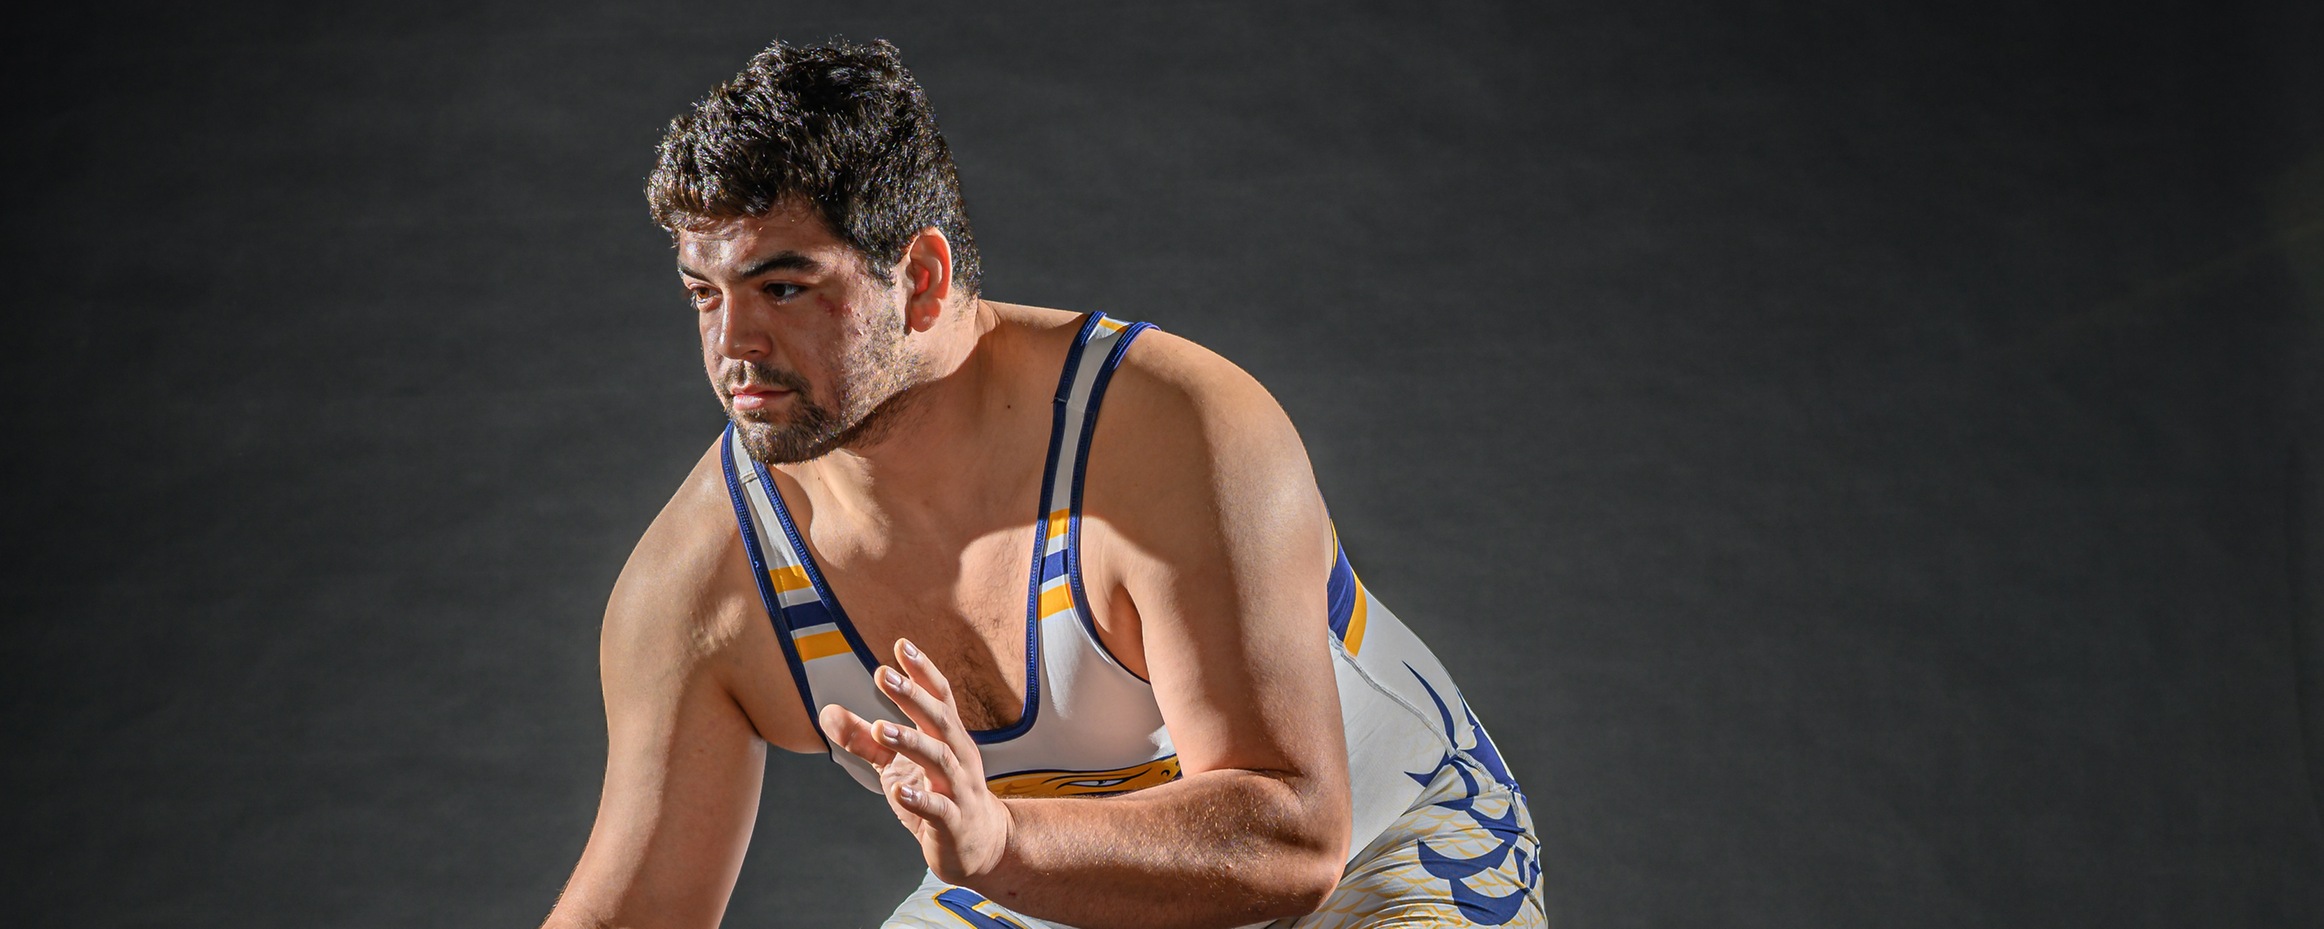 Correa Takes Eighth at the 41st Annual Midwest Classic